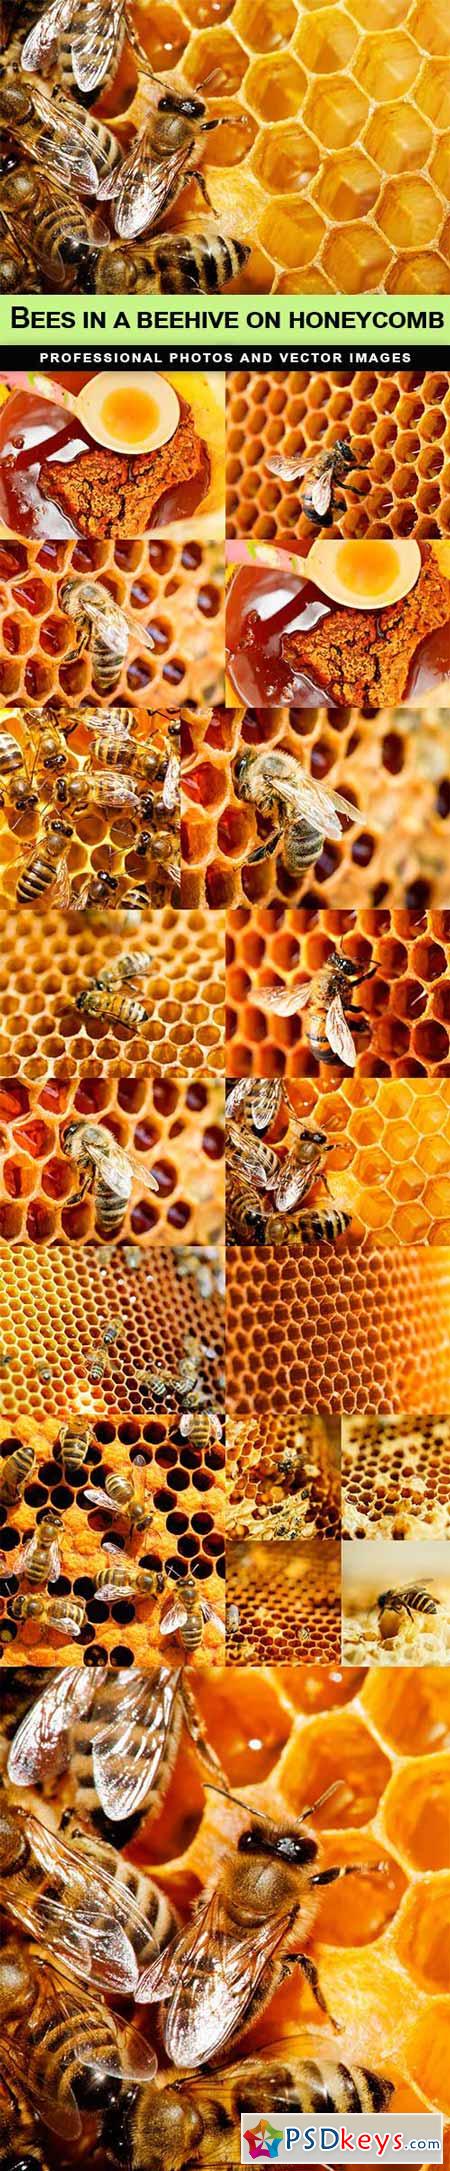 Bees in a beehive on honeycomb - 15 UHQ JPEG